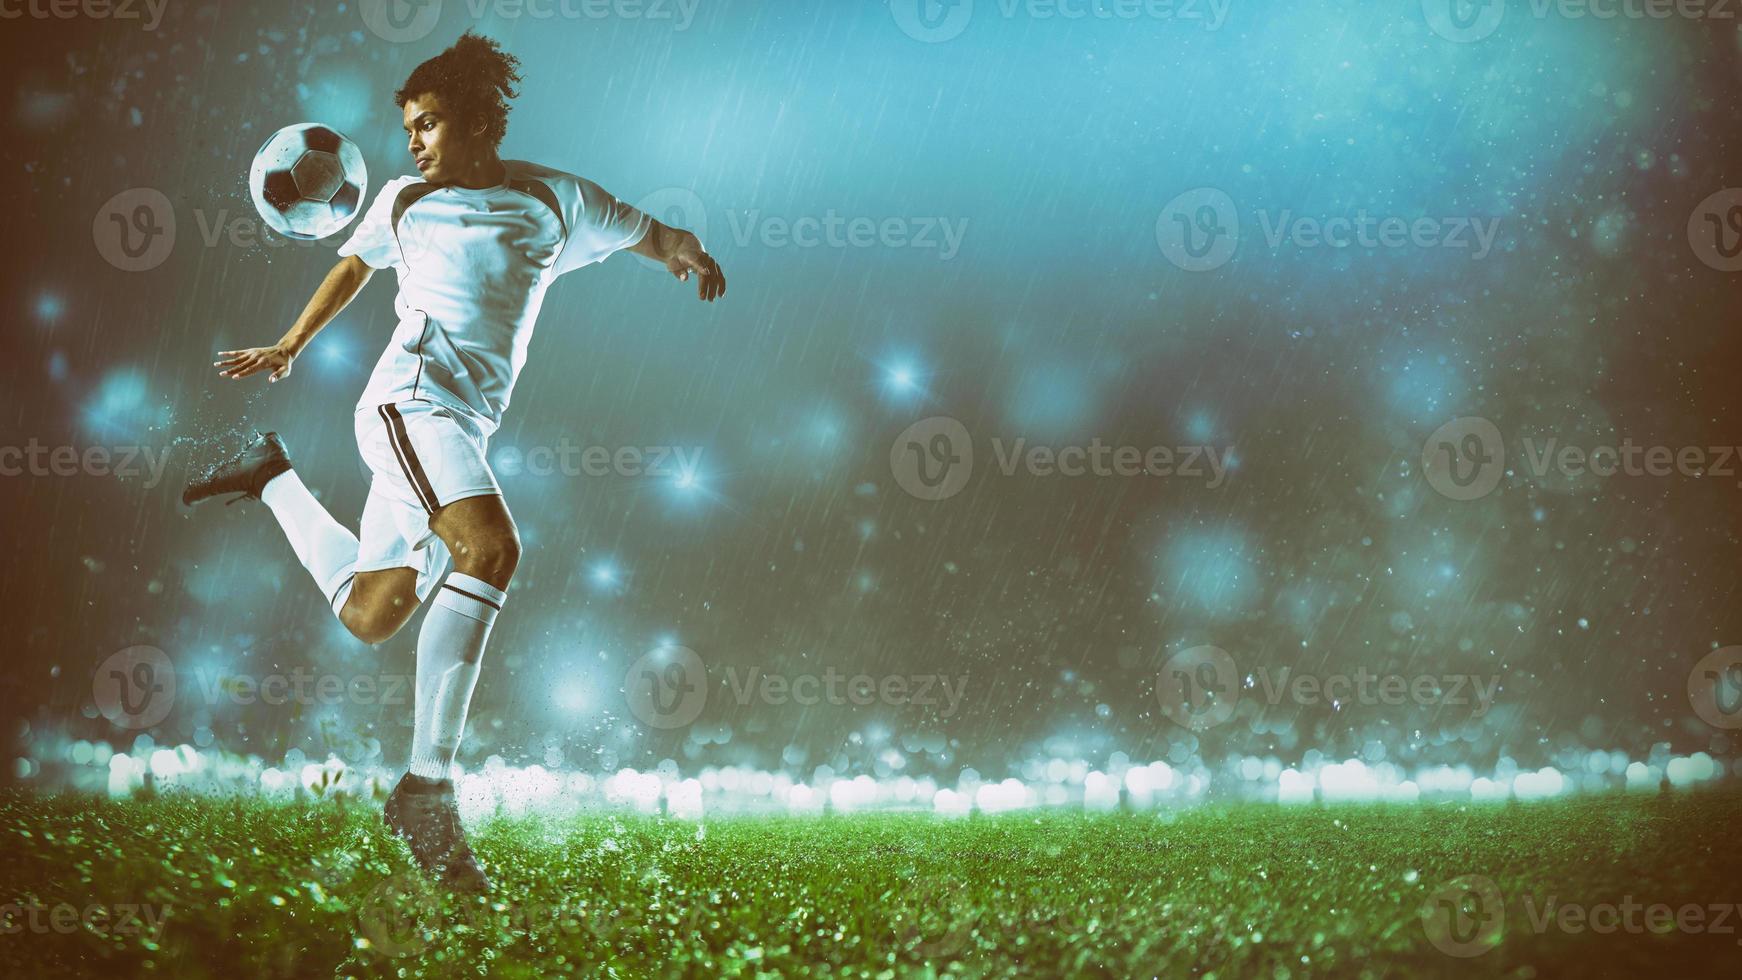 Soccer action scene with a footballer in white uniform performing a heel ball stop photo